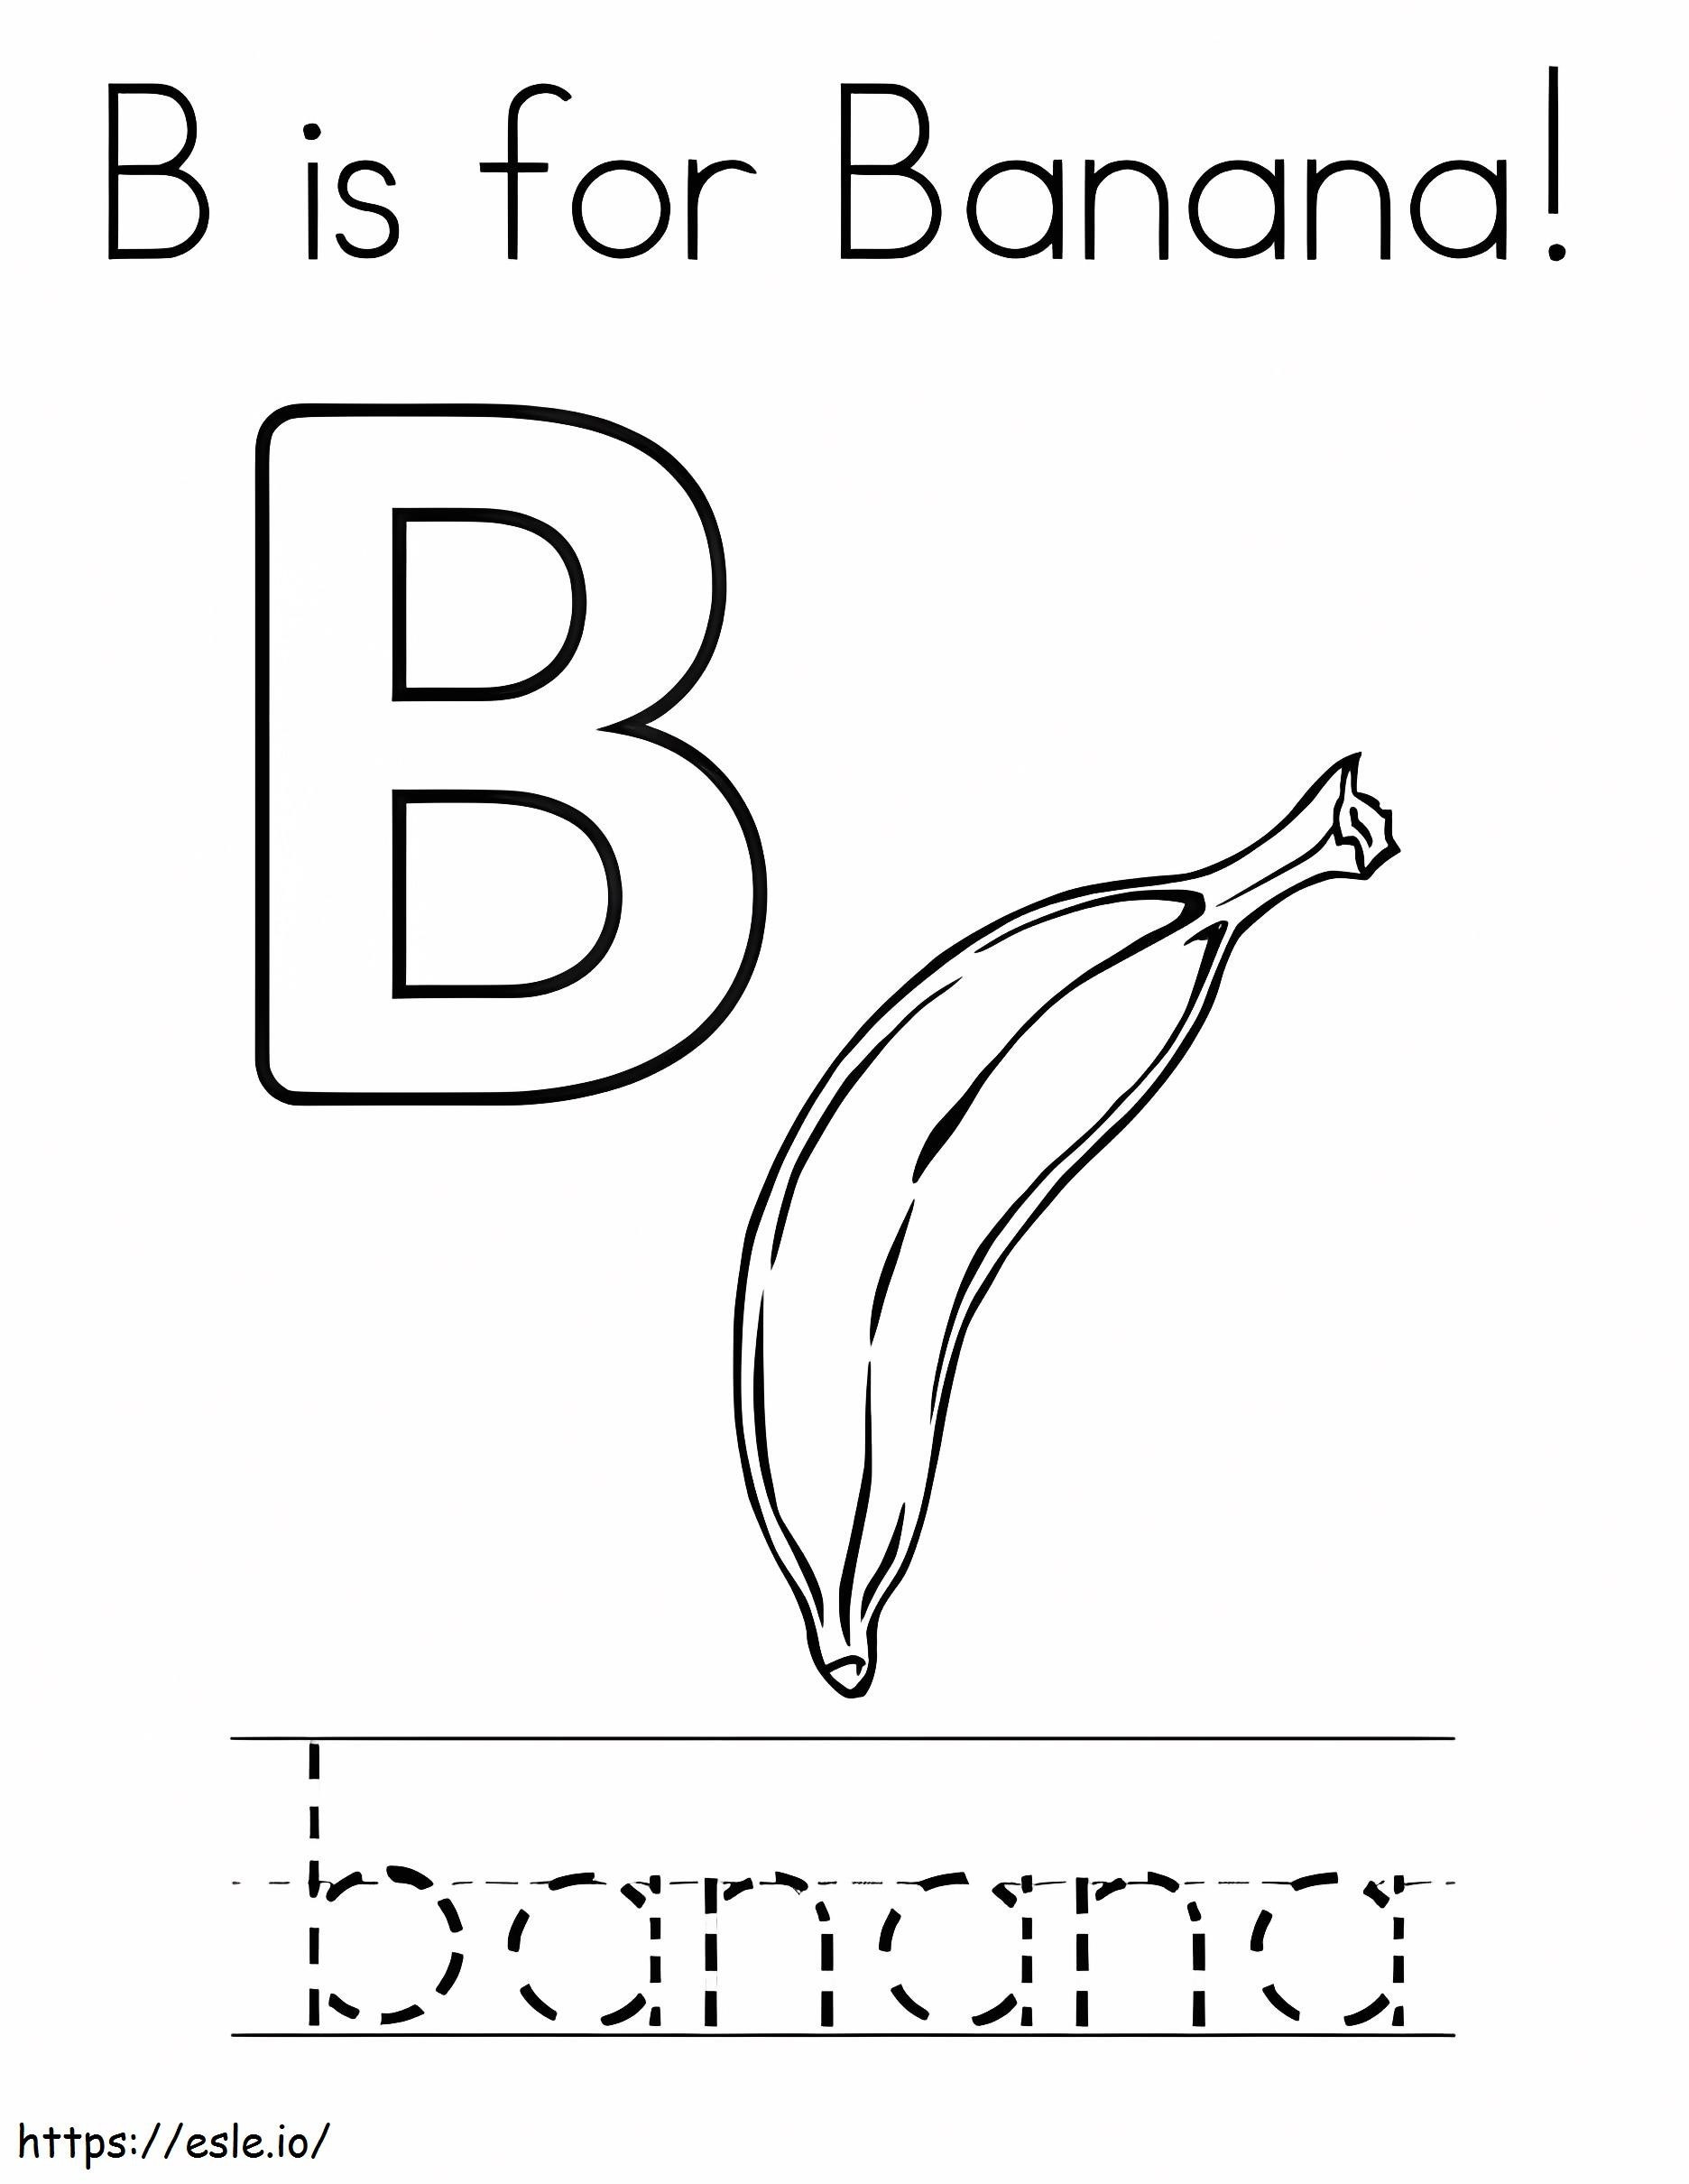 The Letter B Is For Banana coloring page